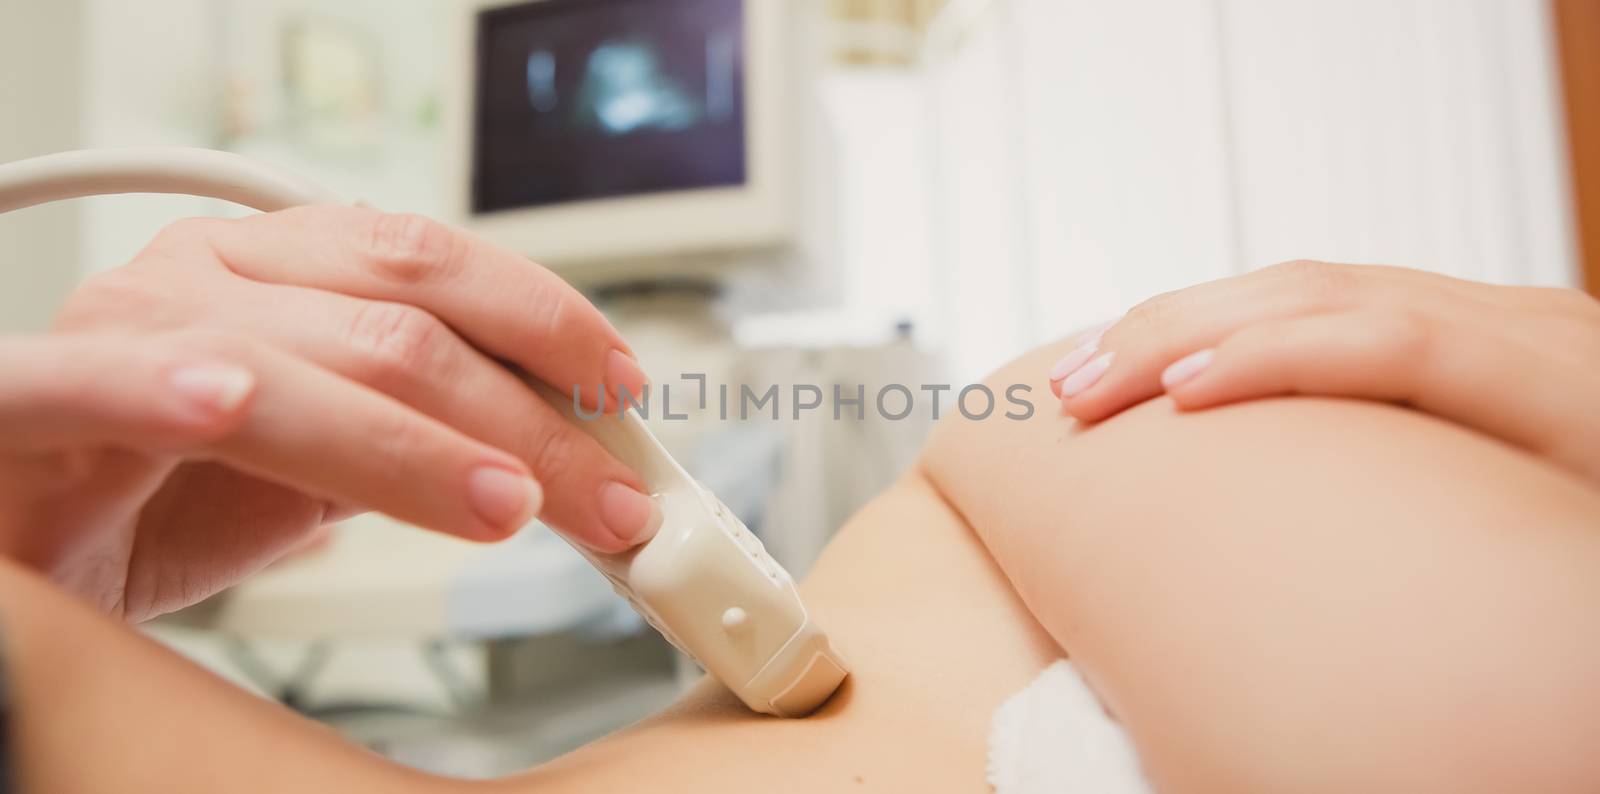 Ultrasound imaging of the abdomen in hospital